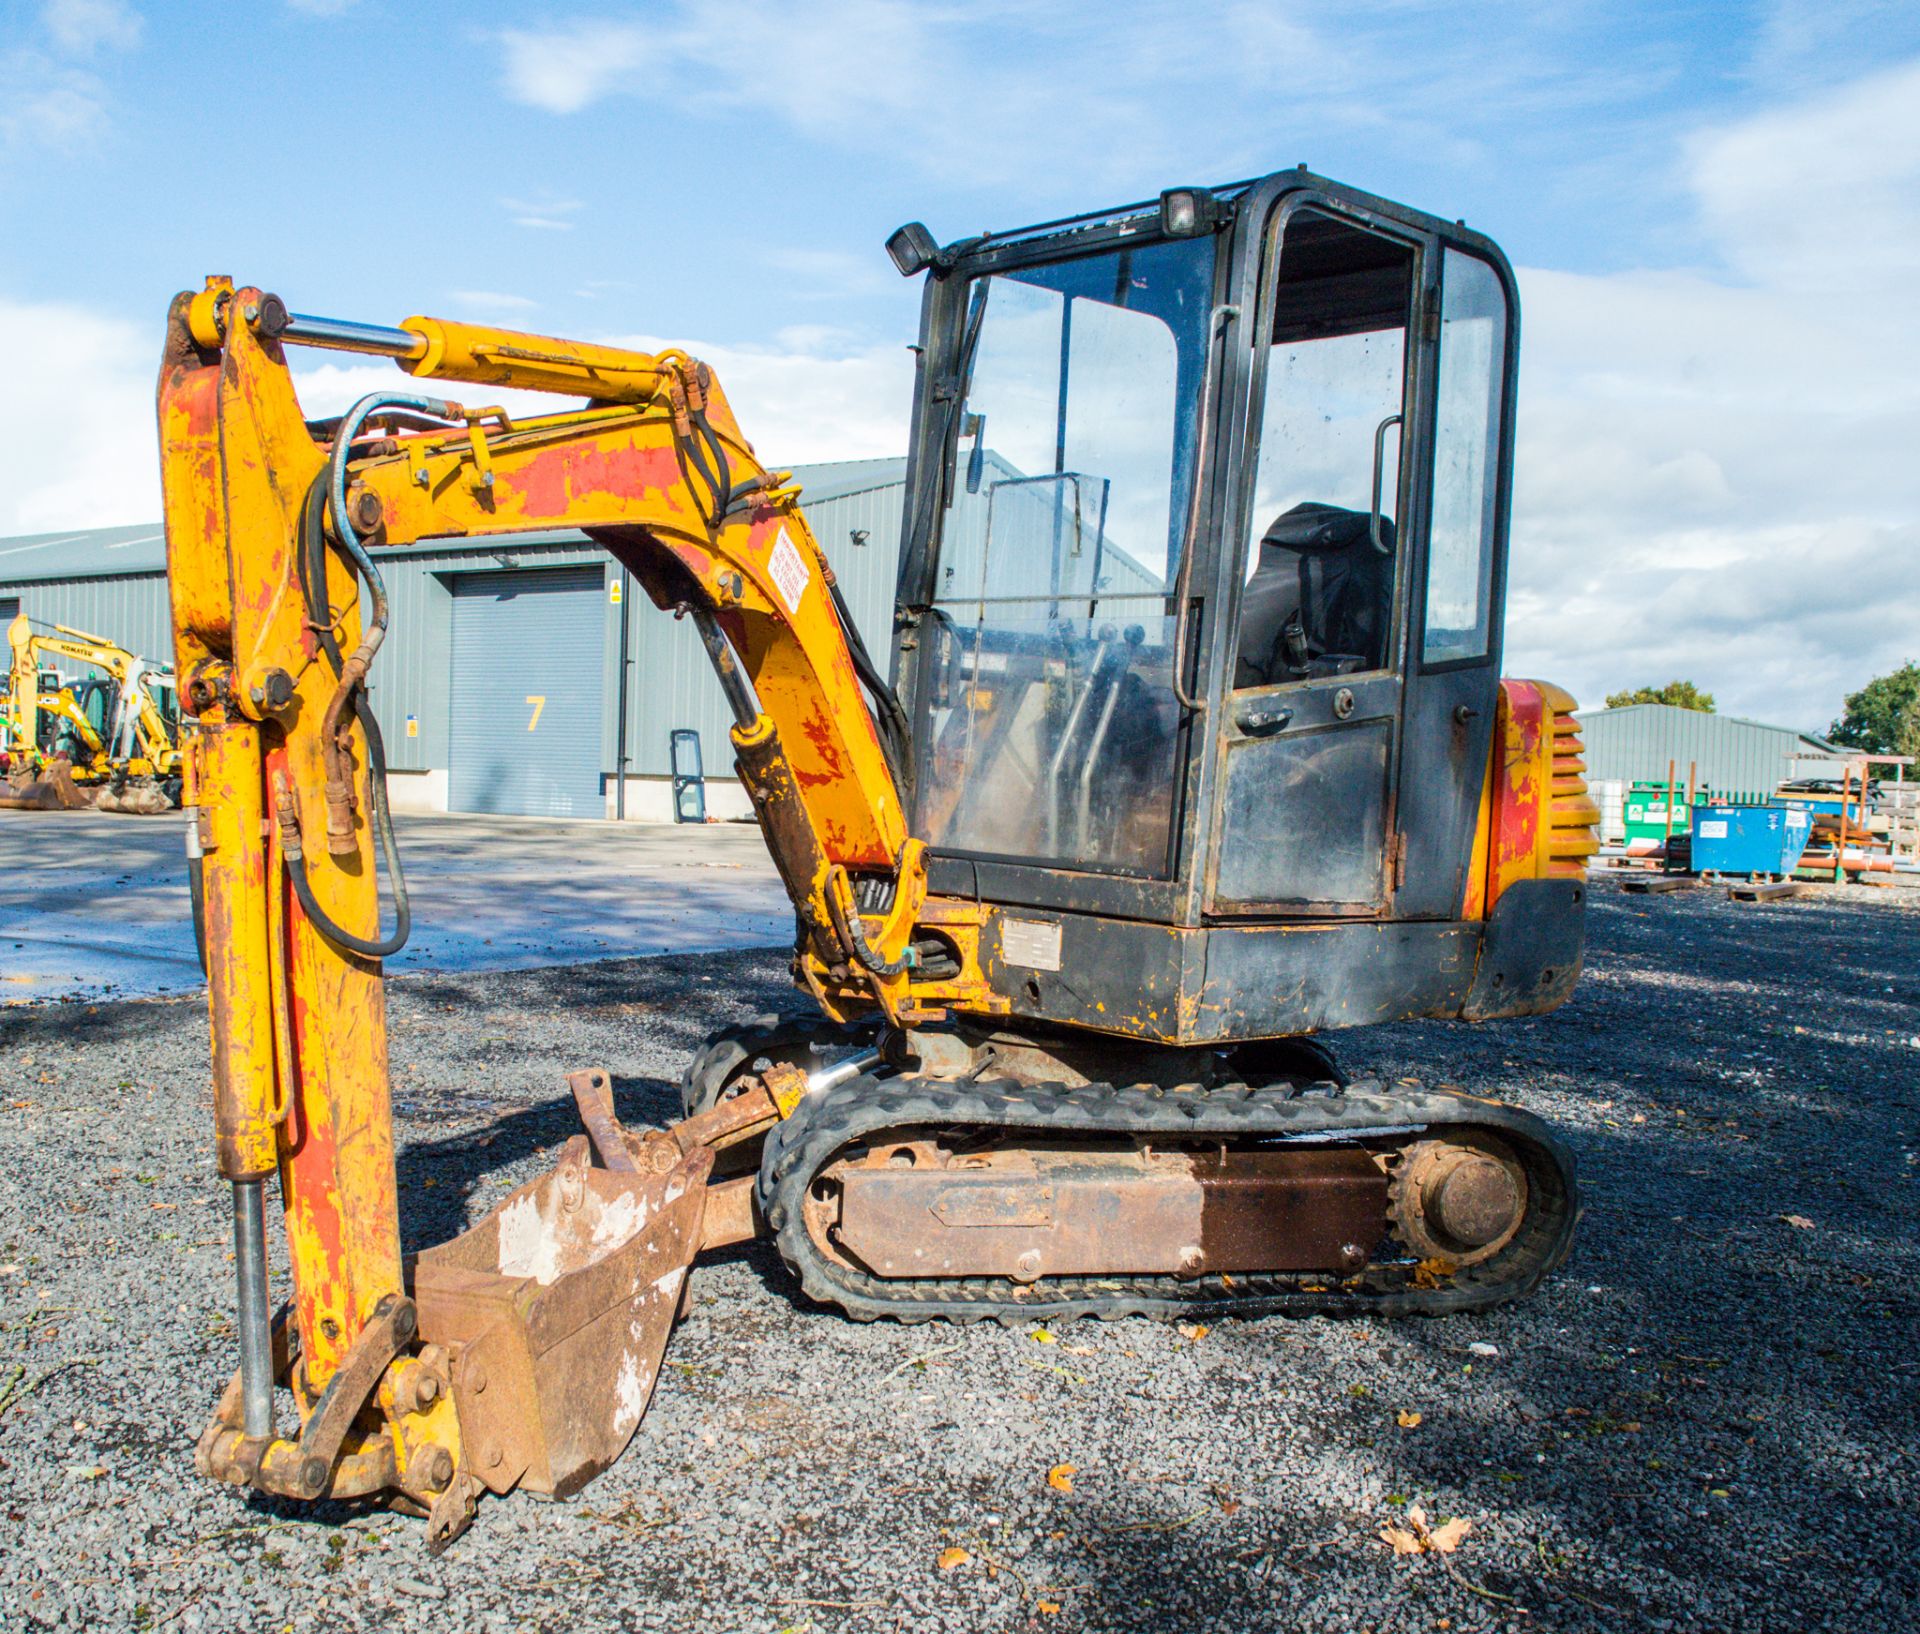 JCB 802 2.4 tonne rubber tracked mini excavator S/N: 0732149 blade, piped, manual quick hitch & 2